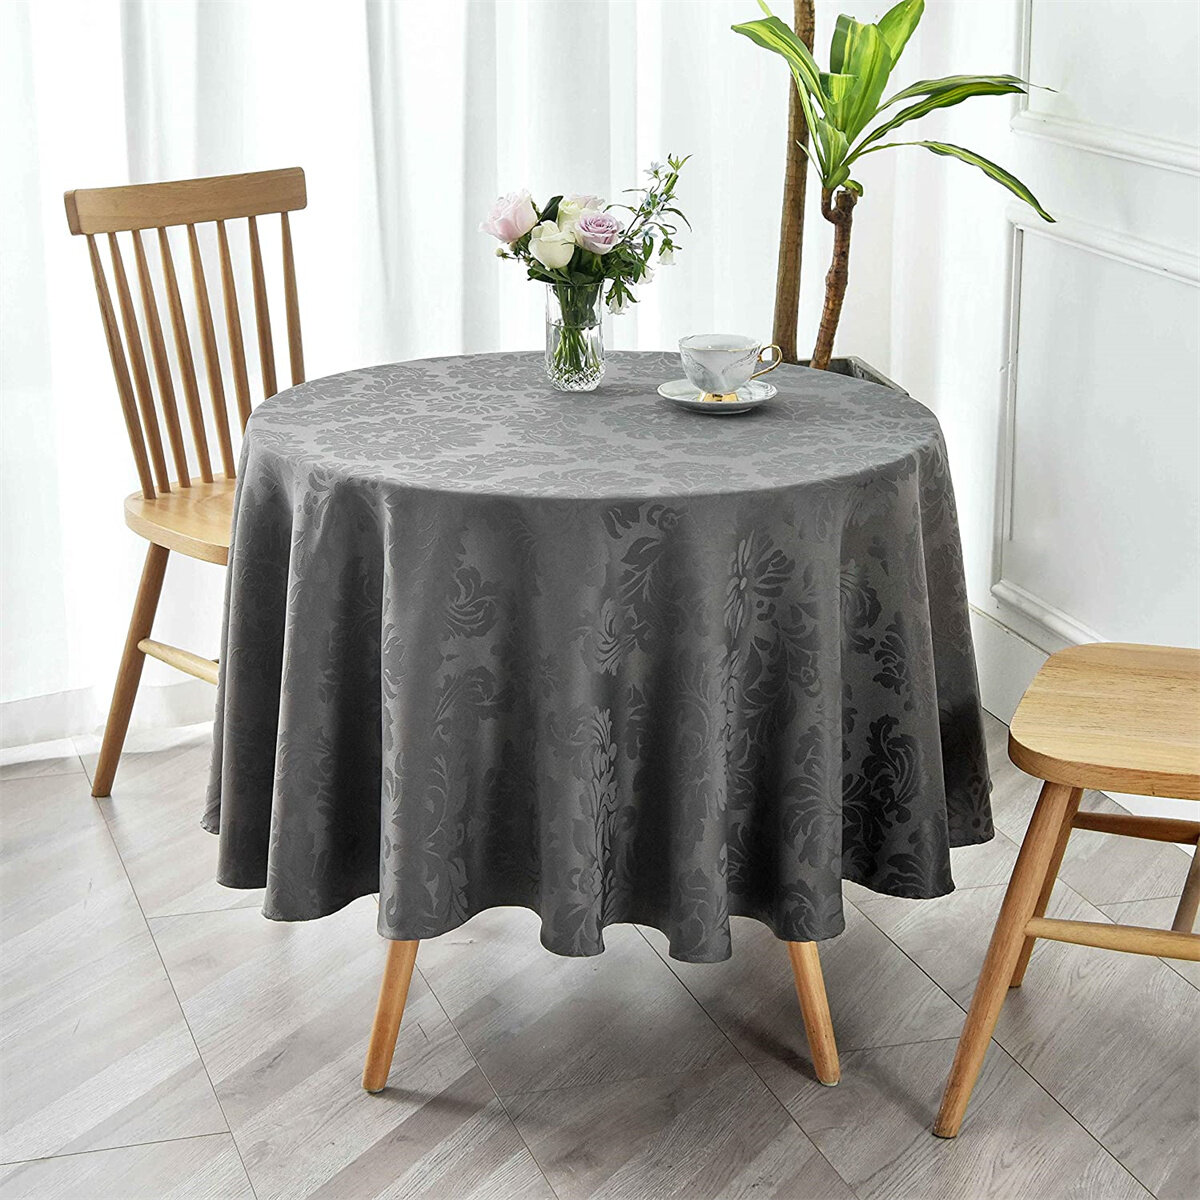 White 90" Round Damask Table Cloth With Swirl Pattern Banquet Parties Kitchen 